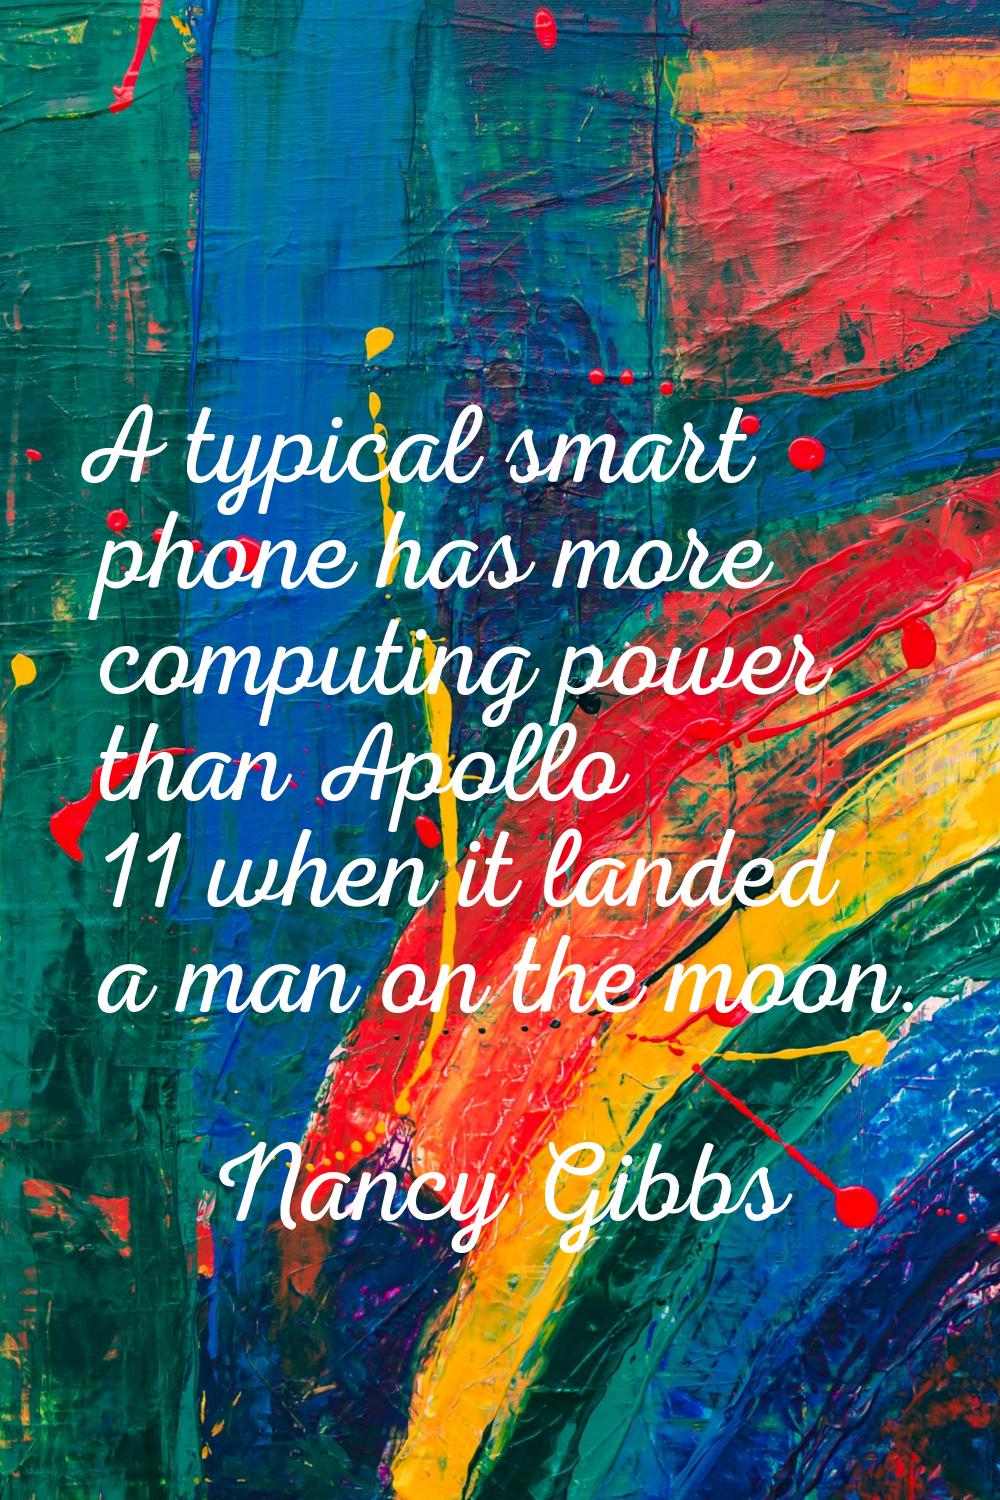 A typical smart phone has more computing power than Apollo 11 when it landed a man on the moon.